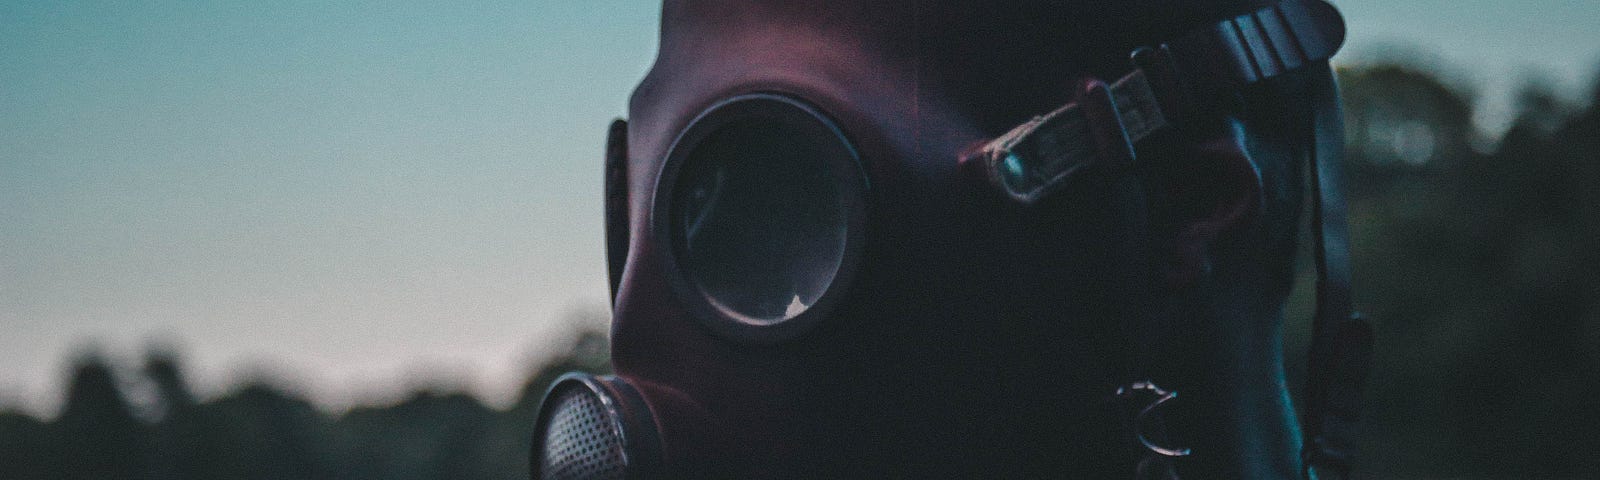 Man with gas mask in field.